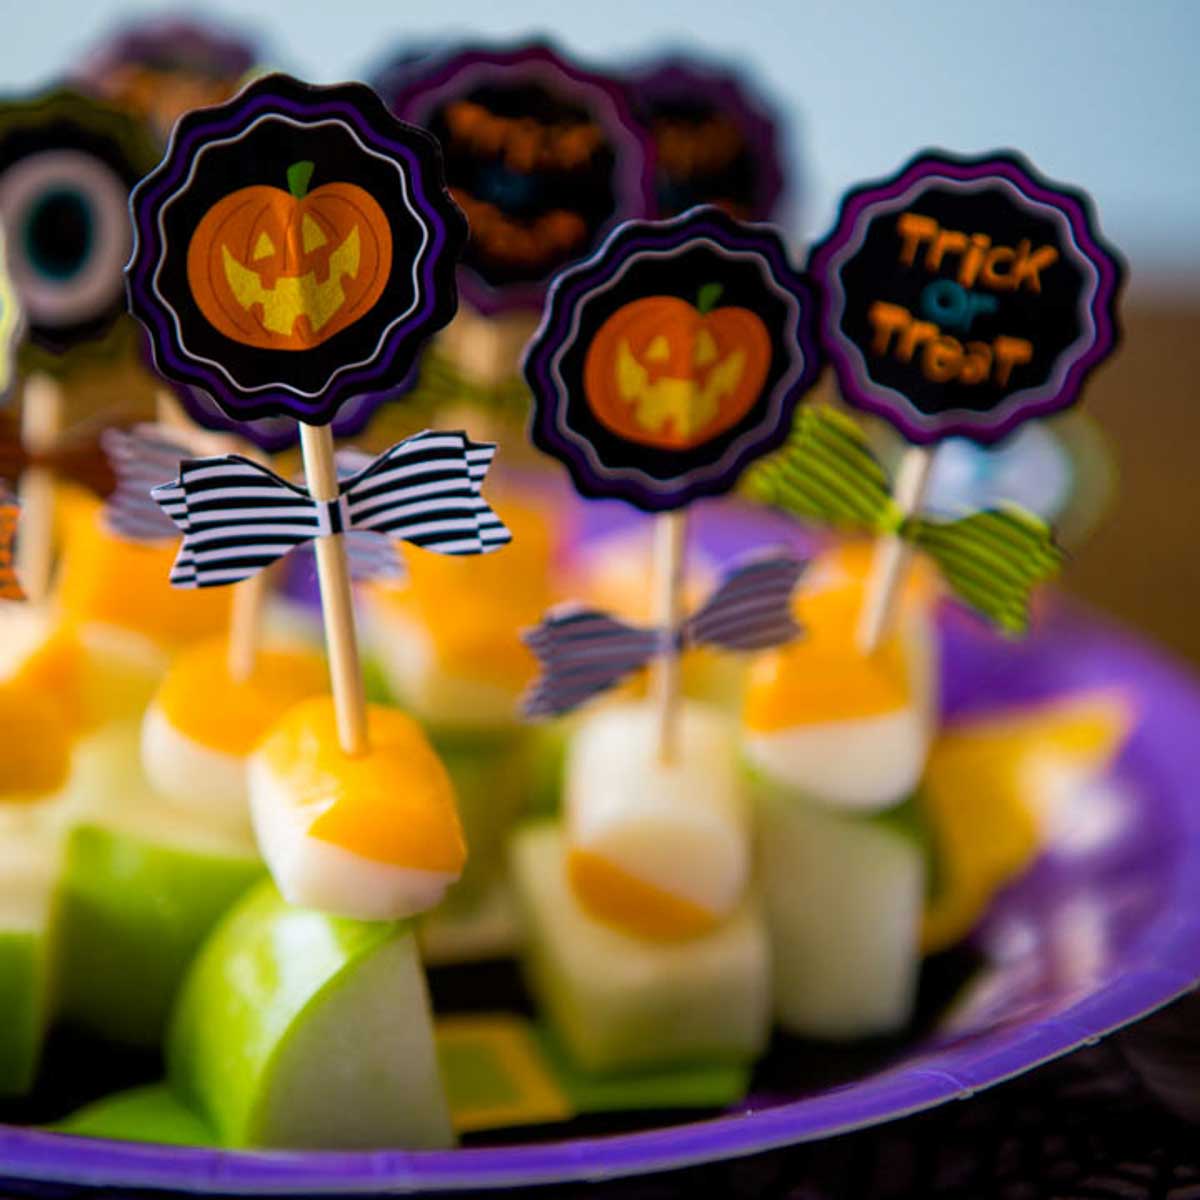 A purple plate has festive skewers of fresh green apples and striped orange cheese chunks with a Halloween pumpkin pick.